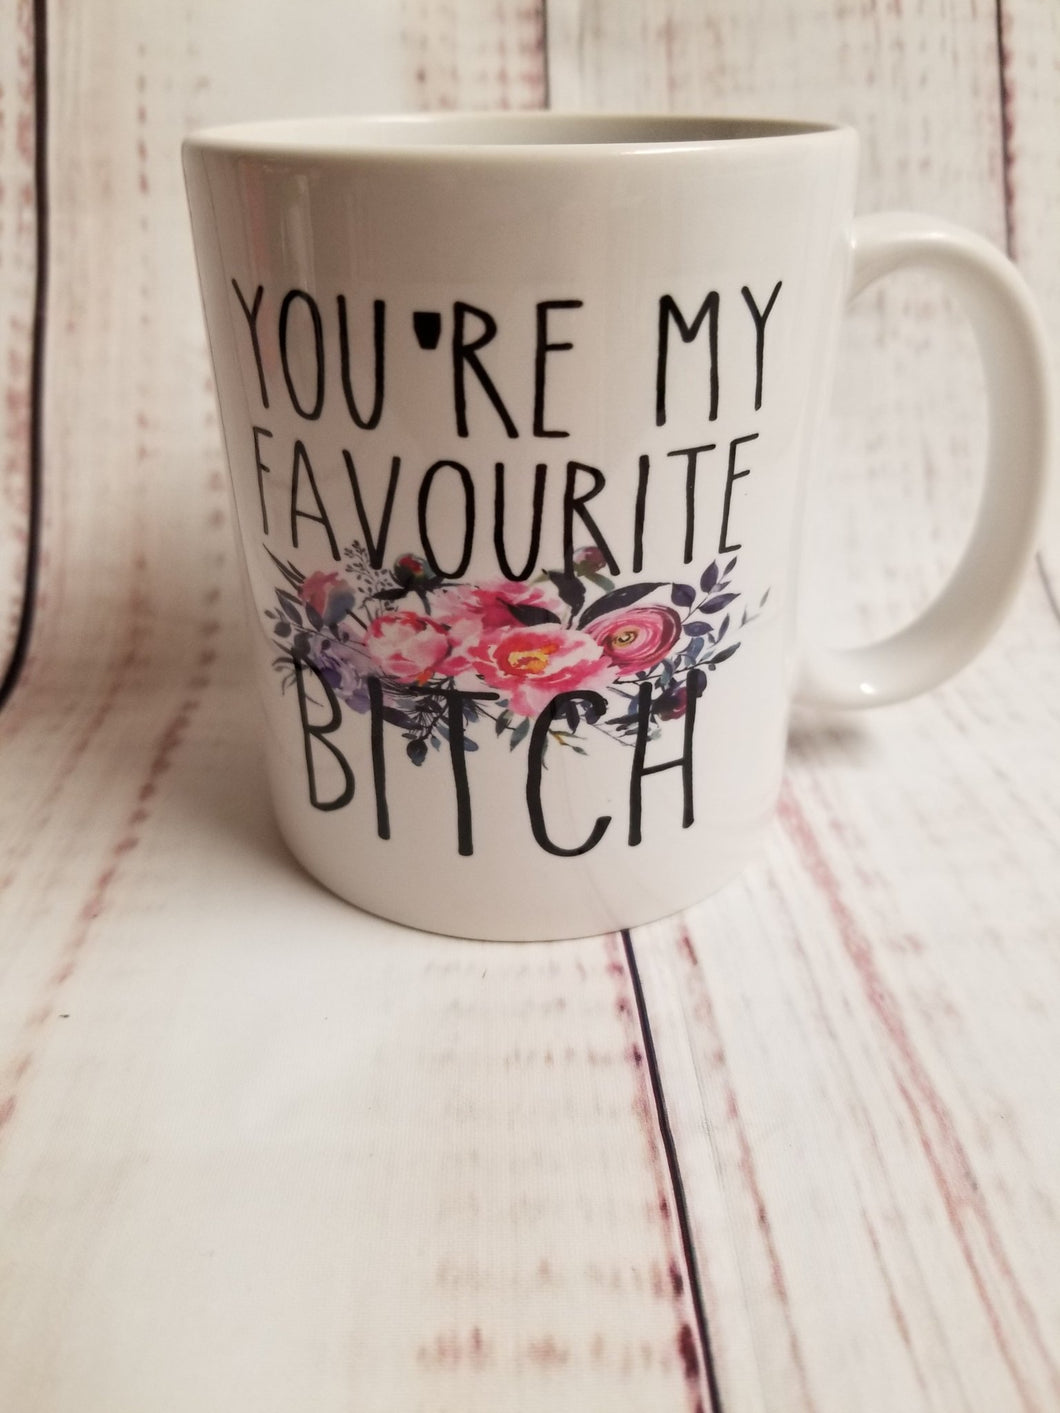 You're my favourite B____ mug - My Other Child / Blooms n' Rooms